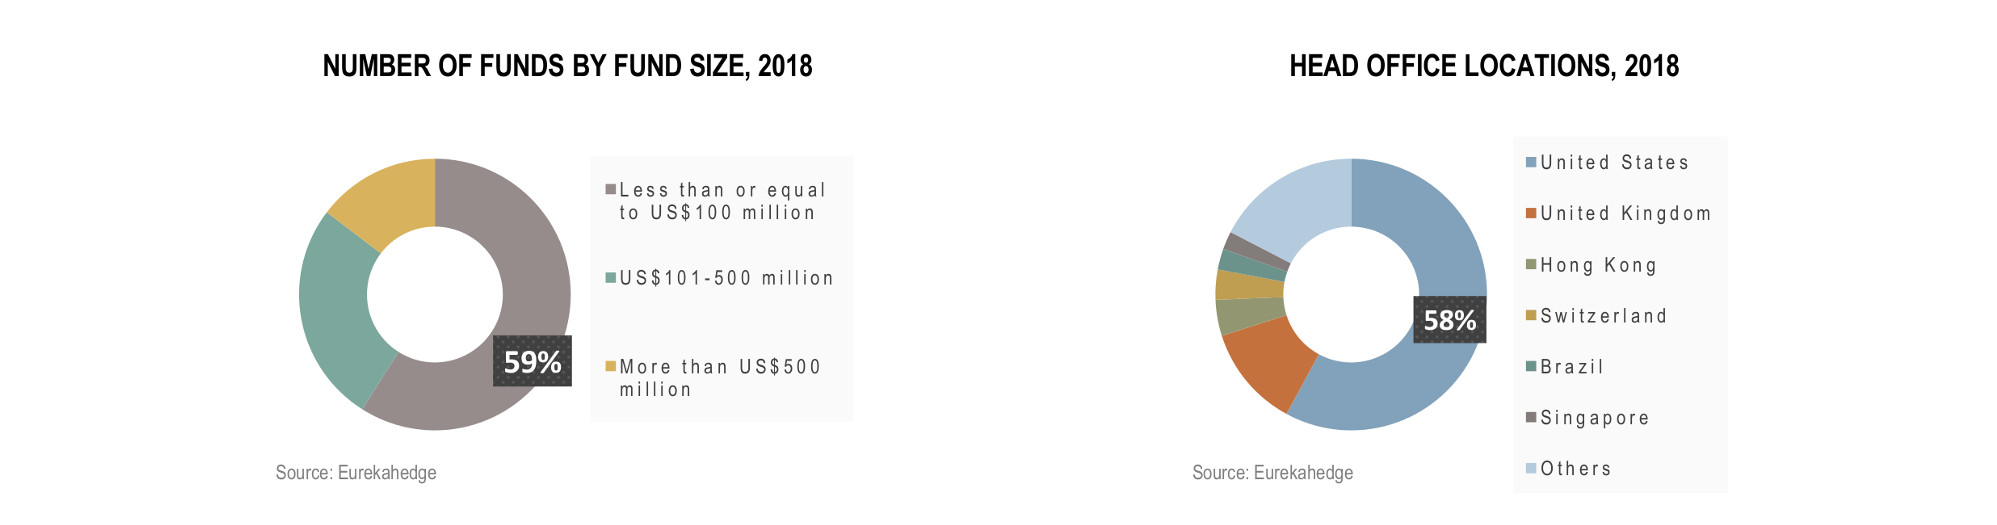 Global Hedge Funds Infographic August 2018 - number of funds by fund size, number of funds by head office locations